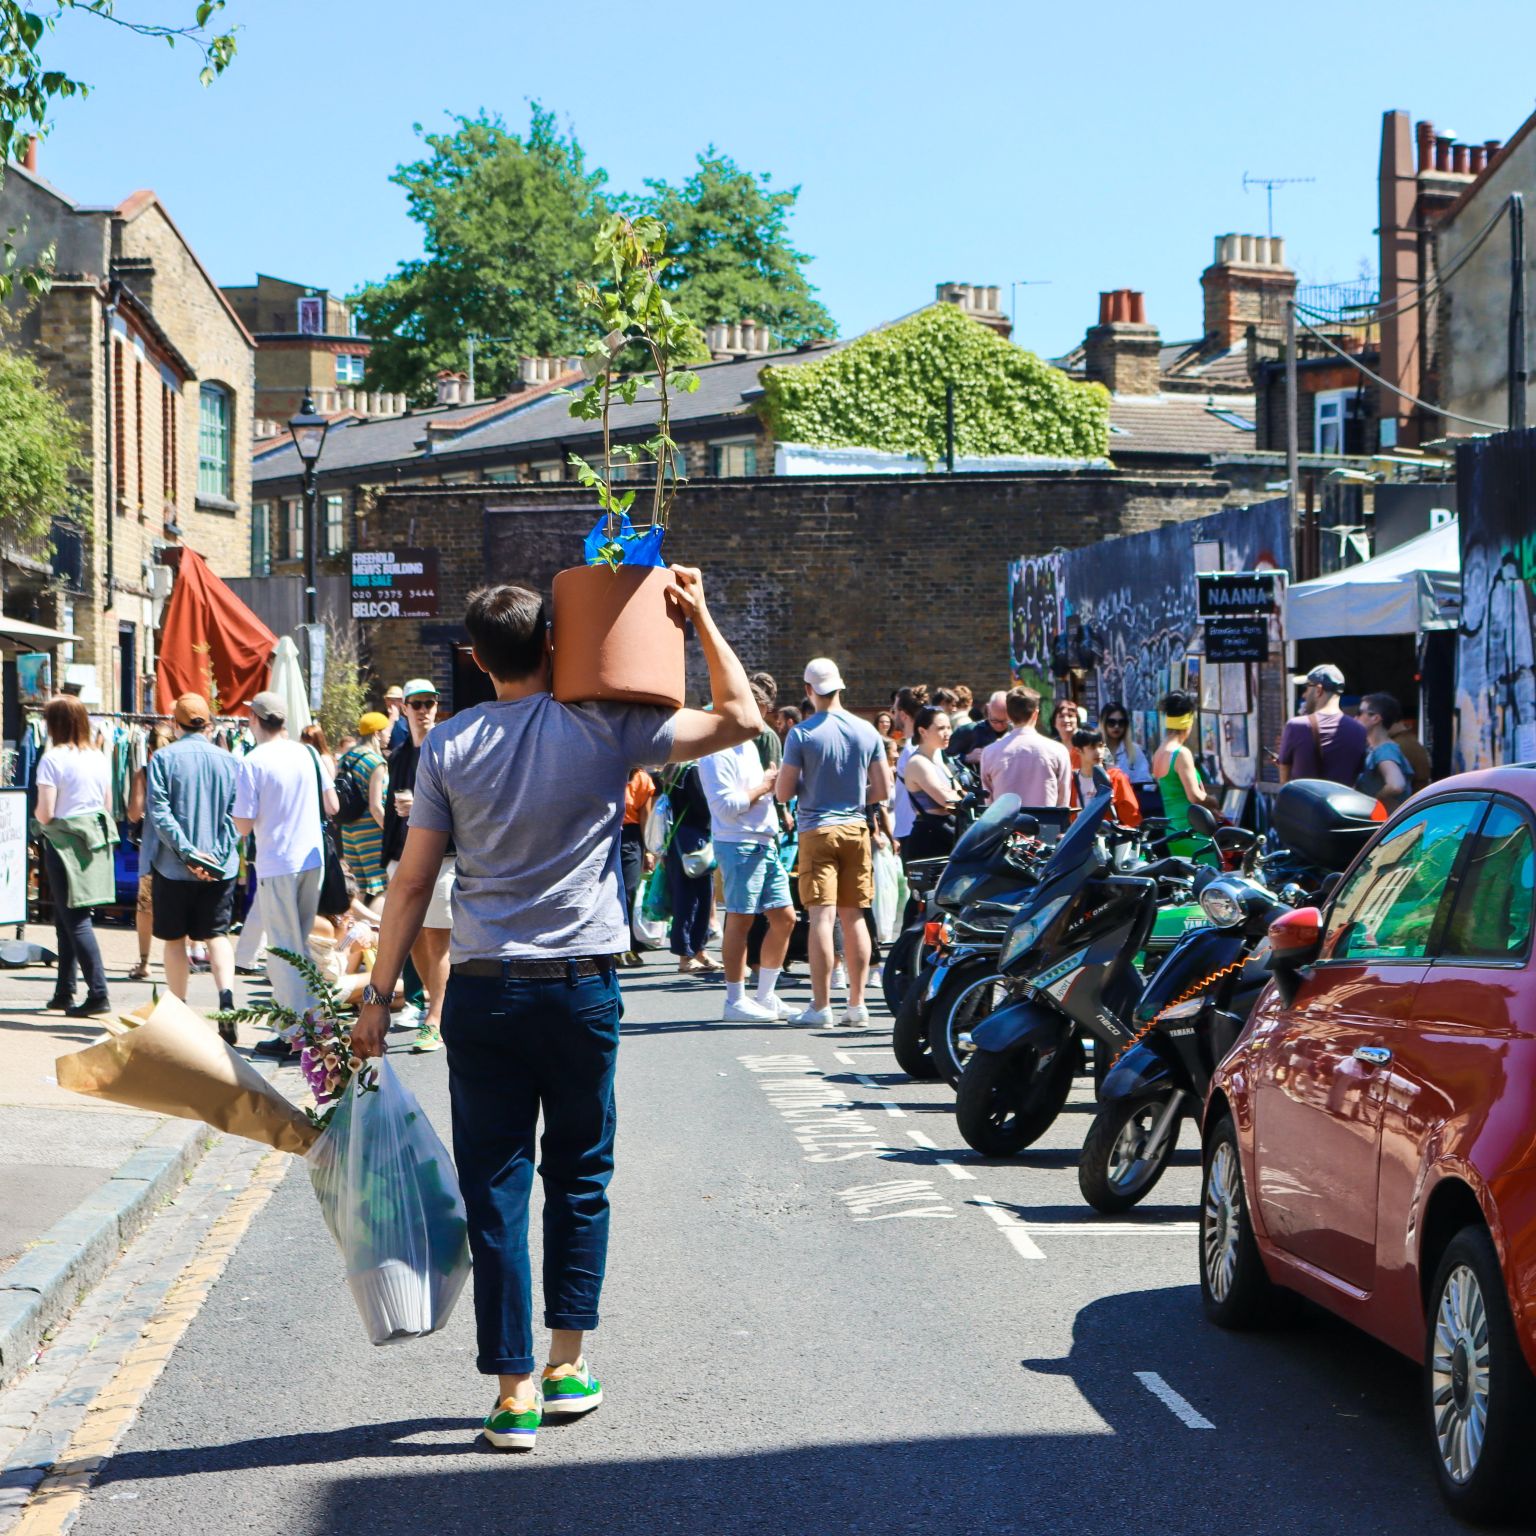 A man carrying a flower pot on his shoulder walking down Columbia Road Flower market. It's a sunny day and there are mopeds and cars parked on the side of a narrow street.